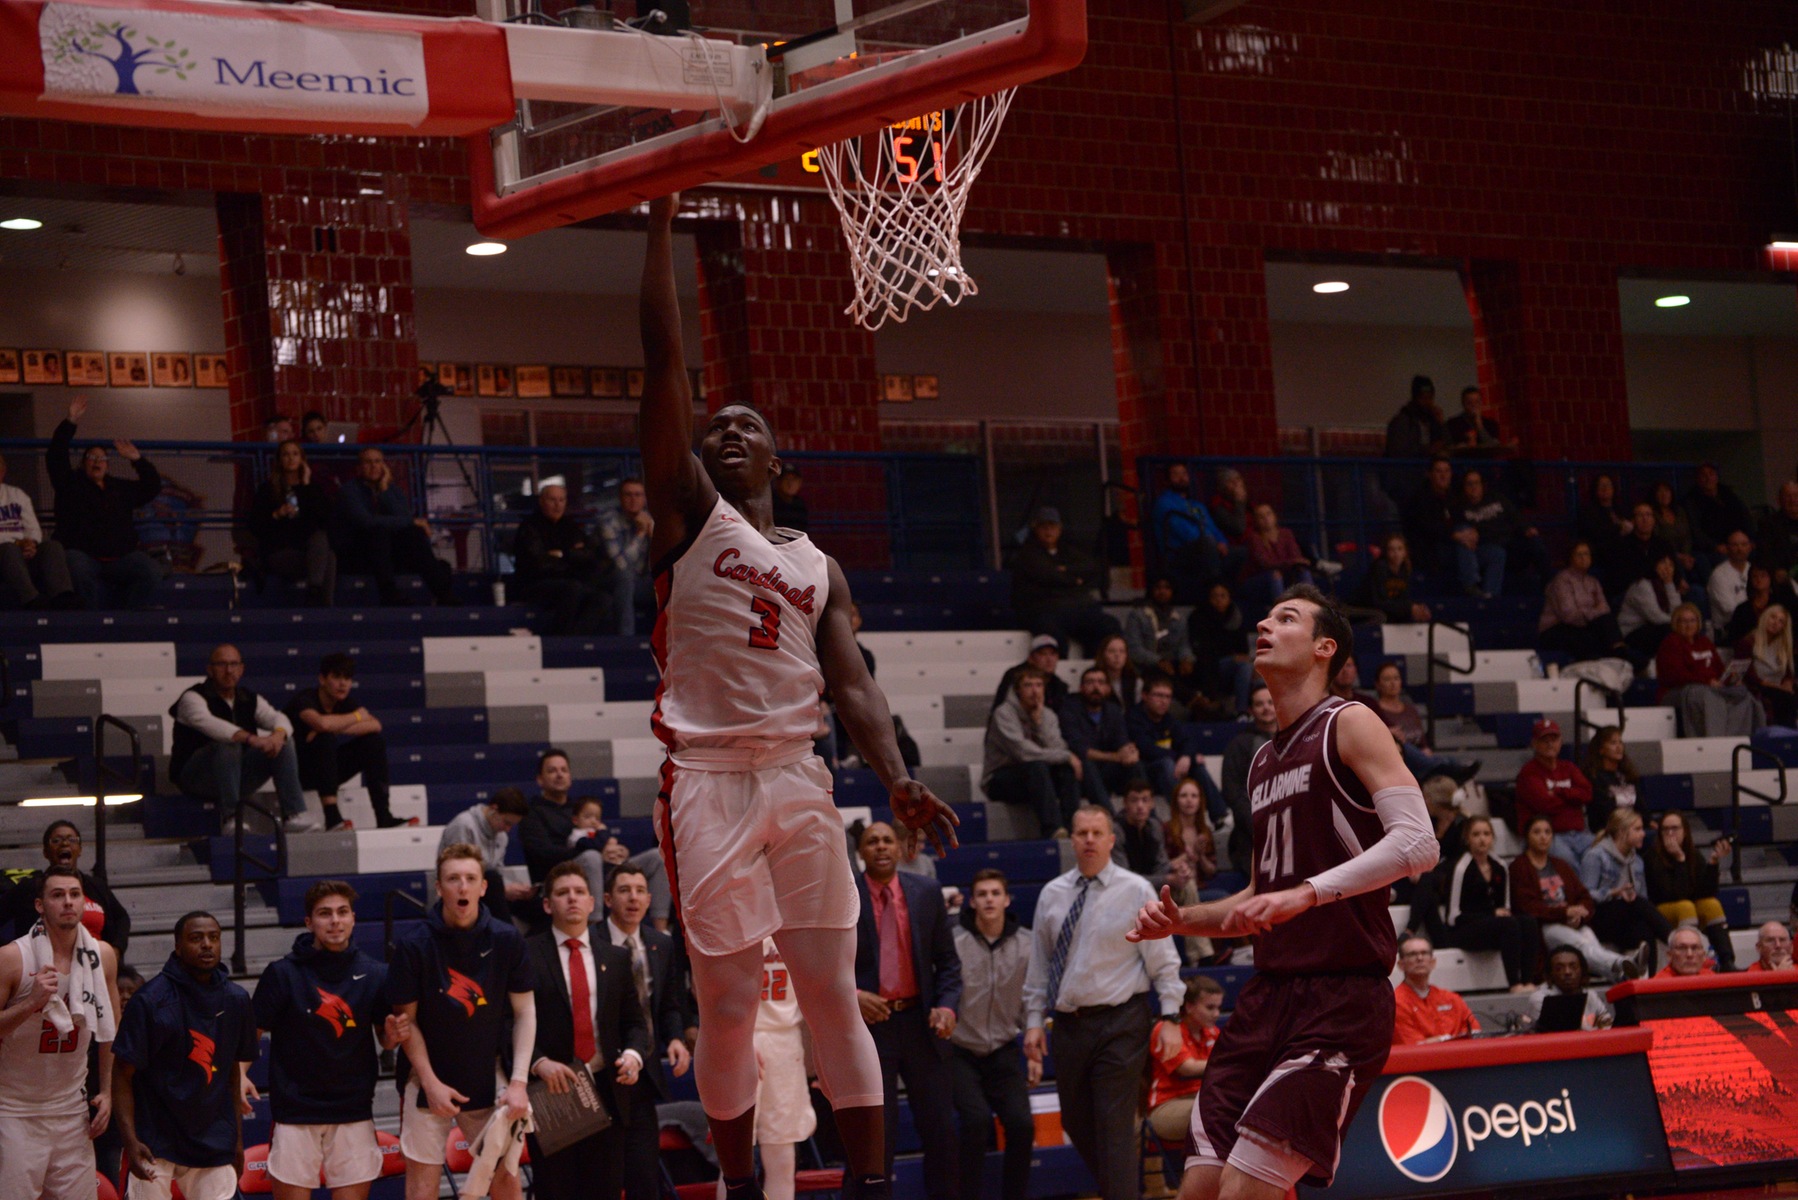 Strong Second Half Not Enough as Cardinal Men Fall to Top-Ranked Bellarmine